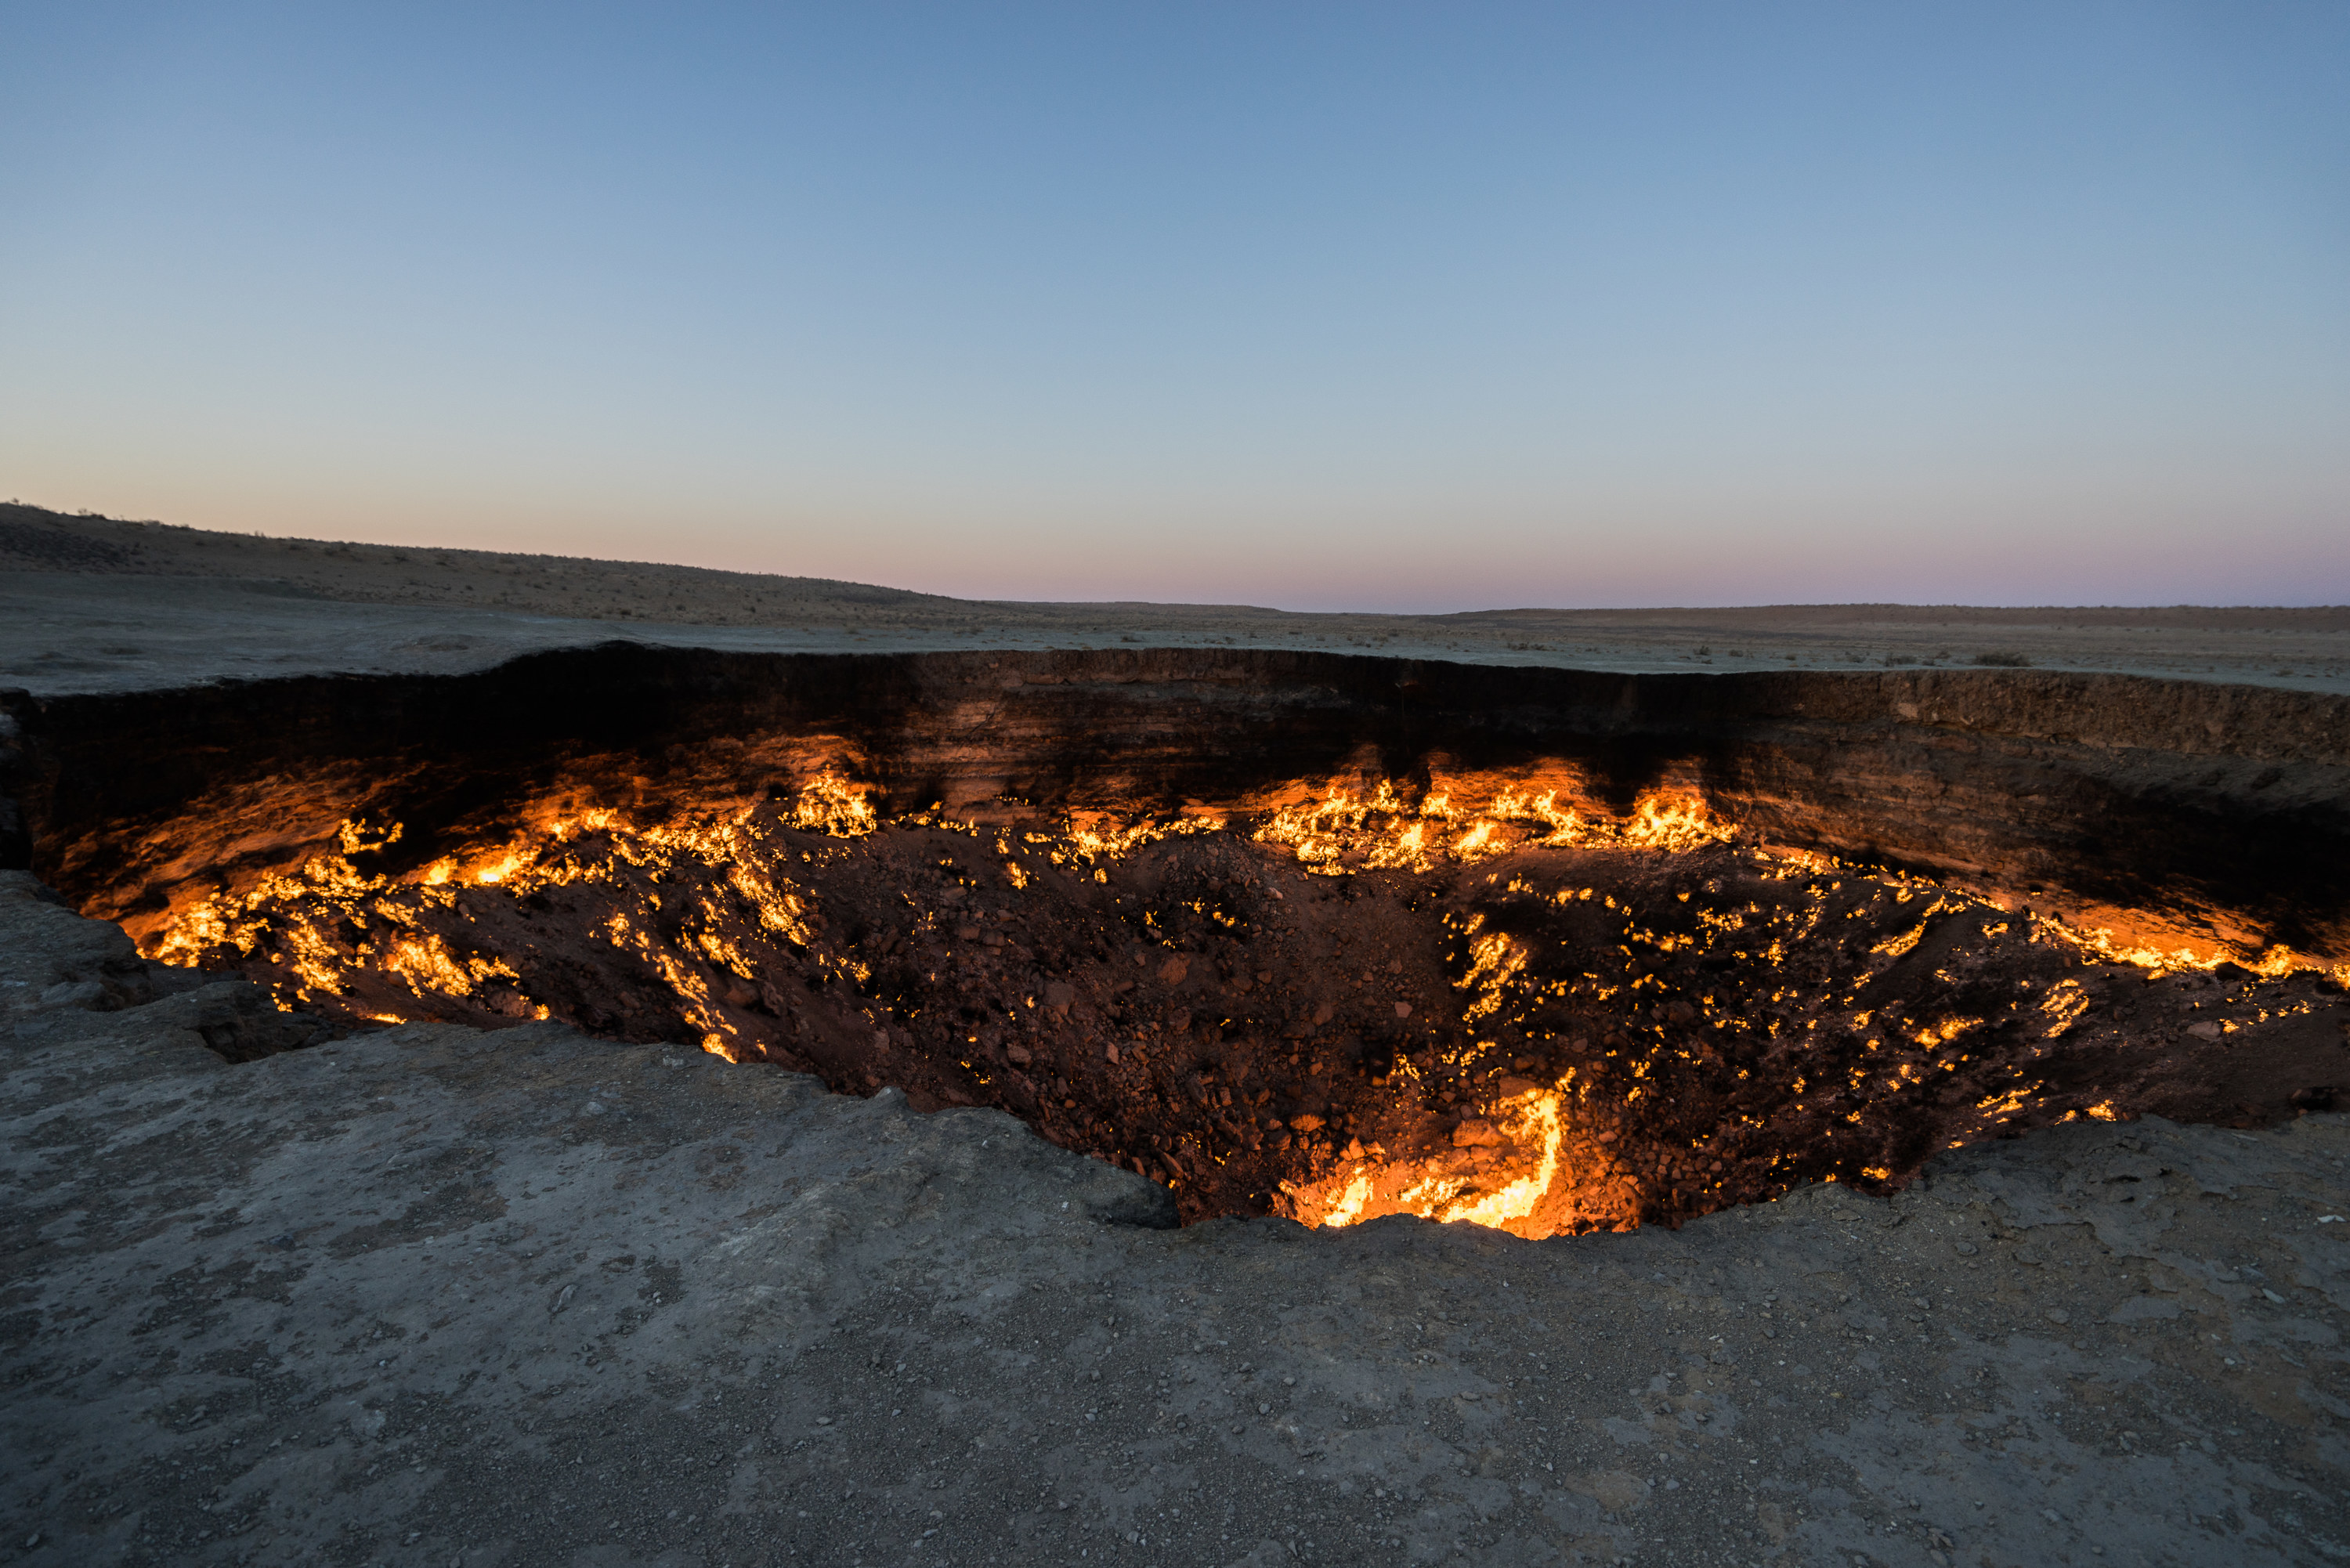 large crater in the earth filled with fire and ash